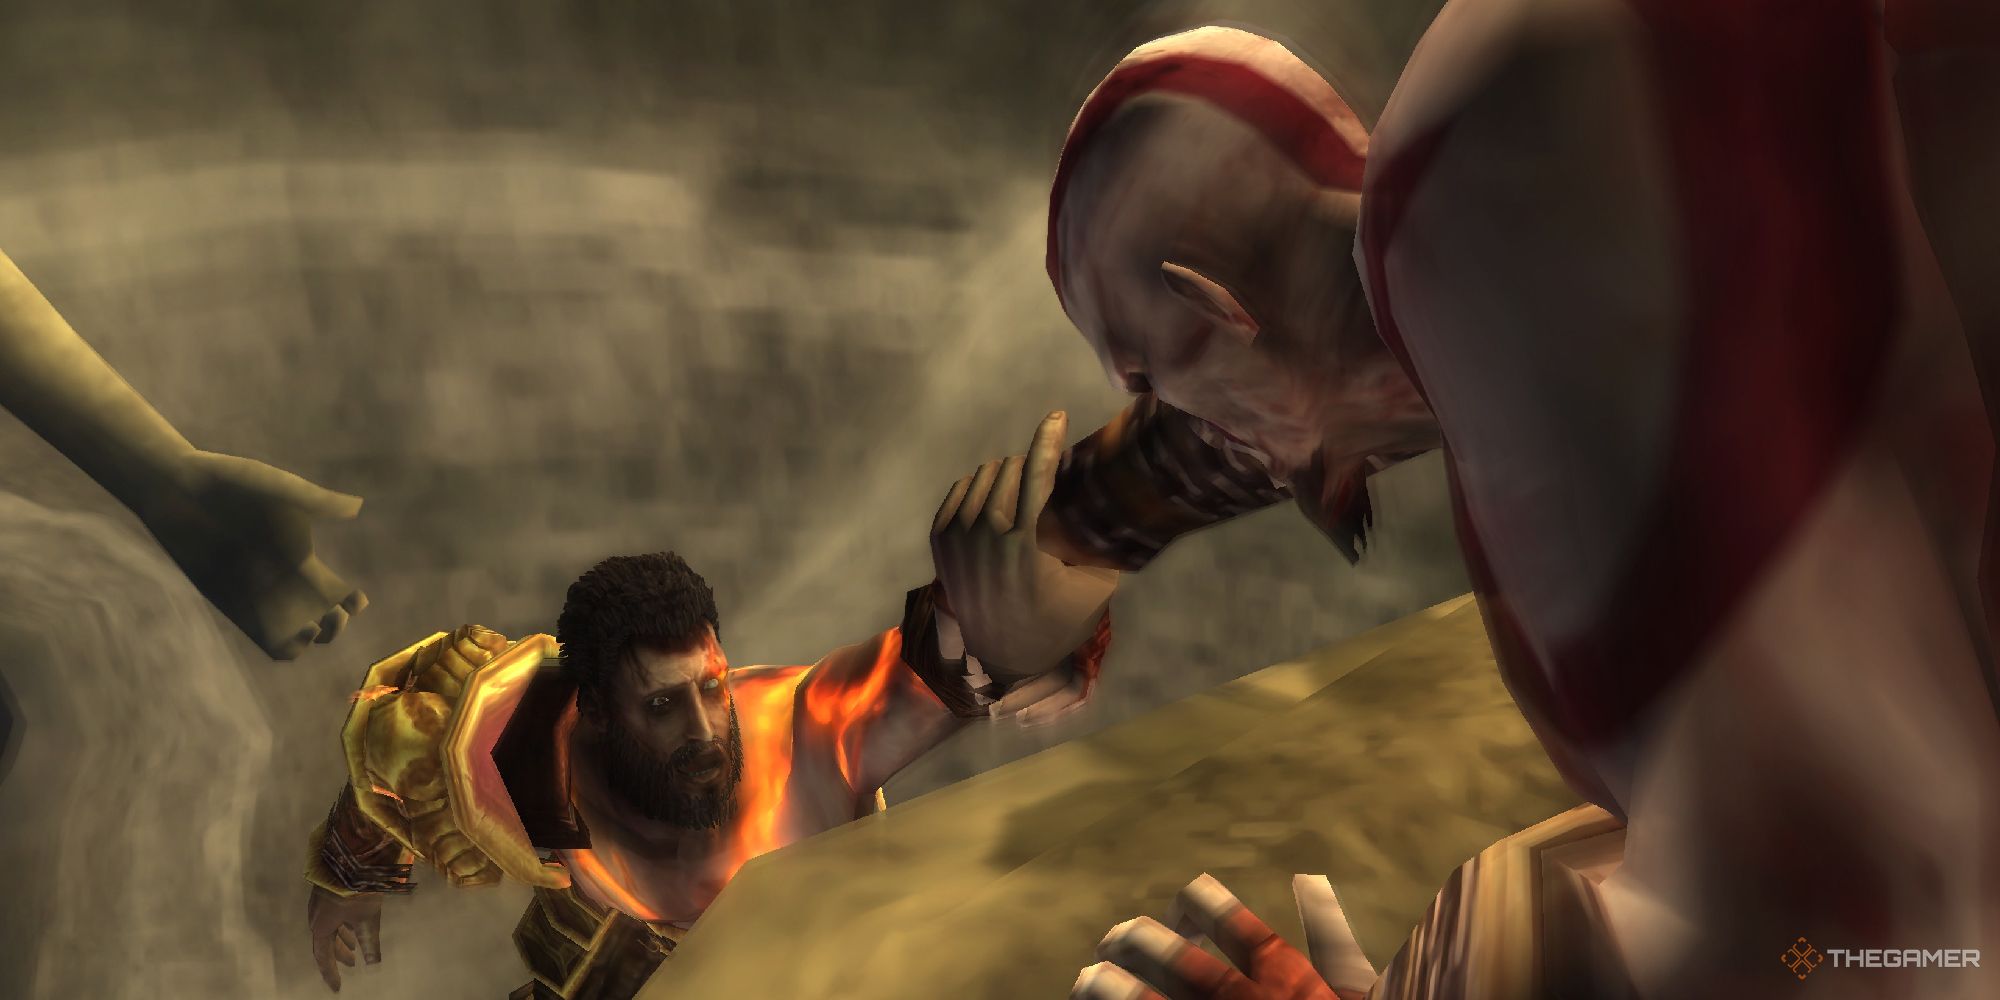 Recently got a brand new copy of Ghost of Sparta, with an unused Deimos DLC  code in the box still. Just starting to get into god of war and I  absolutely love